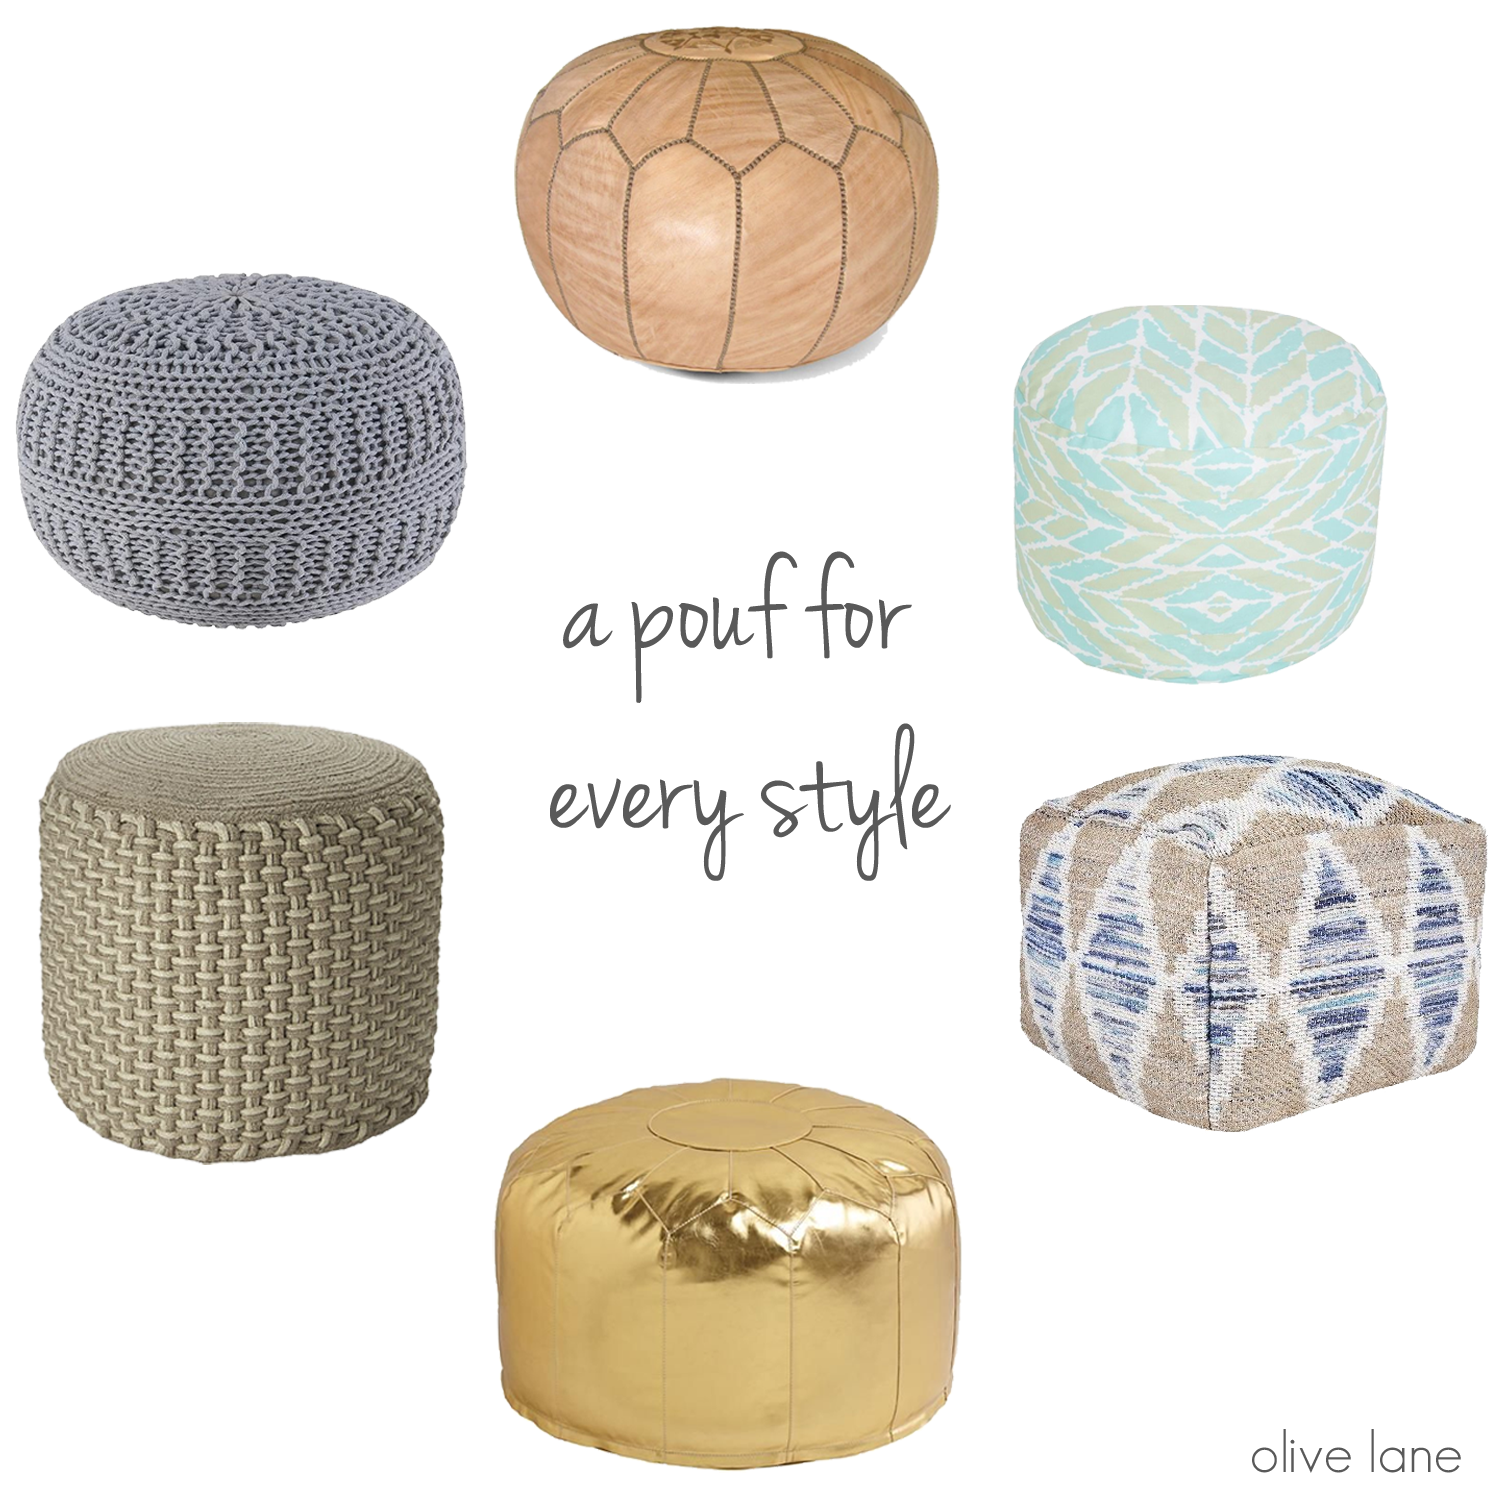 Olive Lane - How to Decorate Using a Pouf www.olivelaneinteriors.com